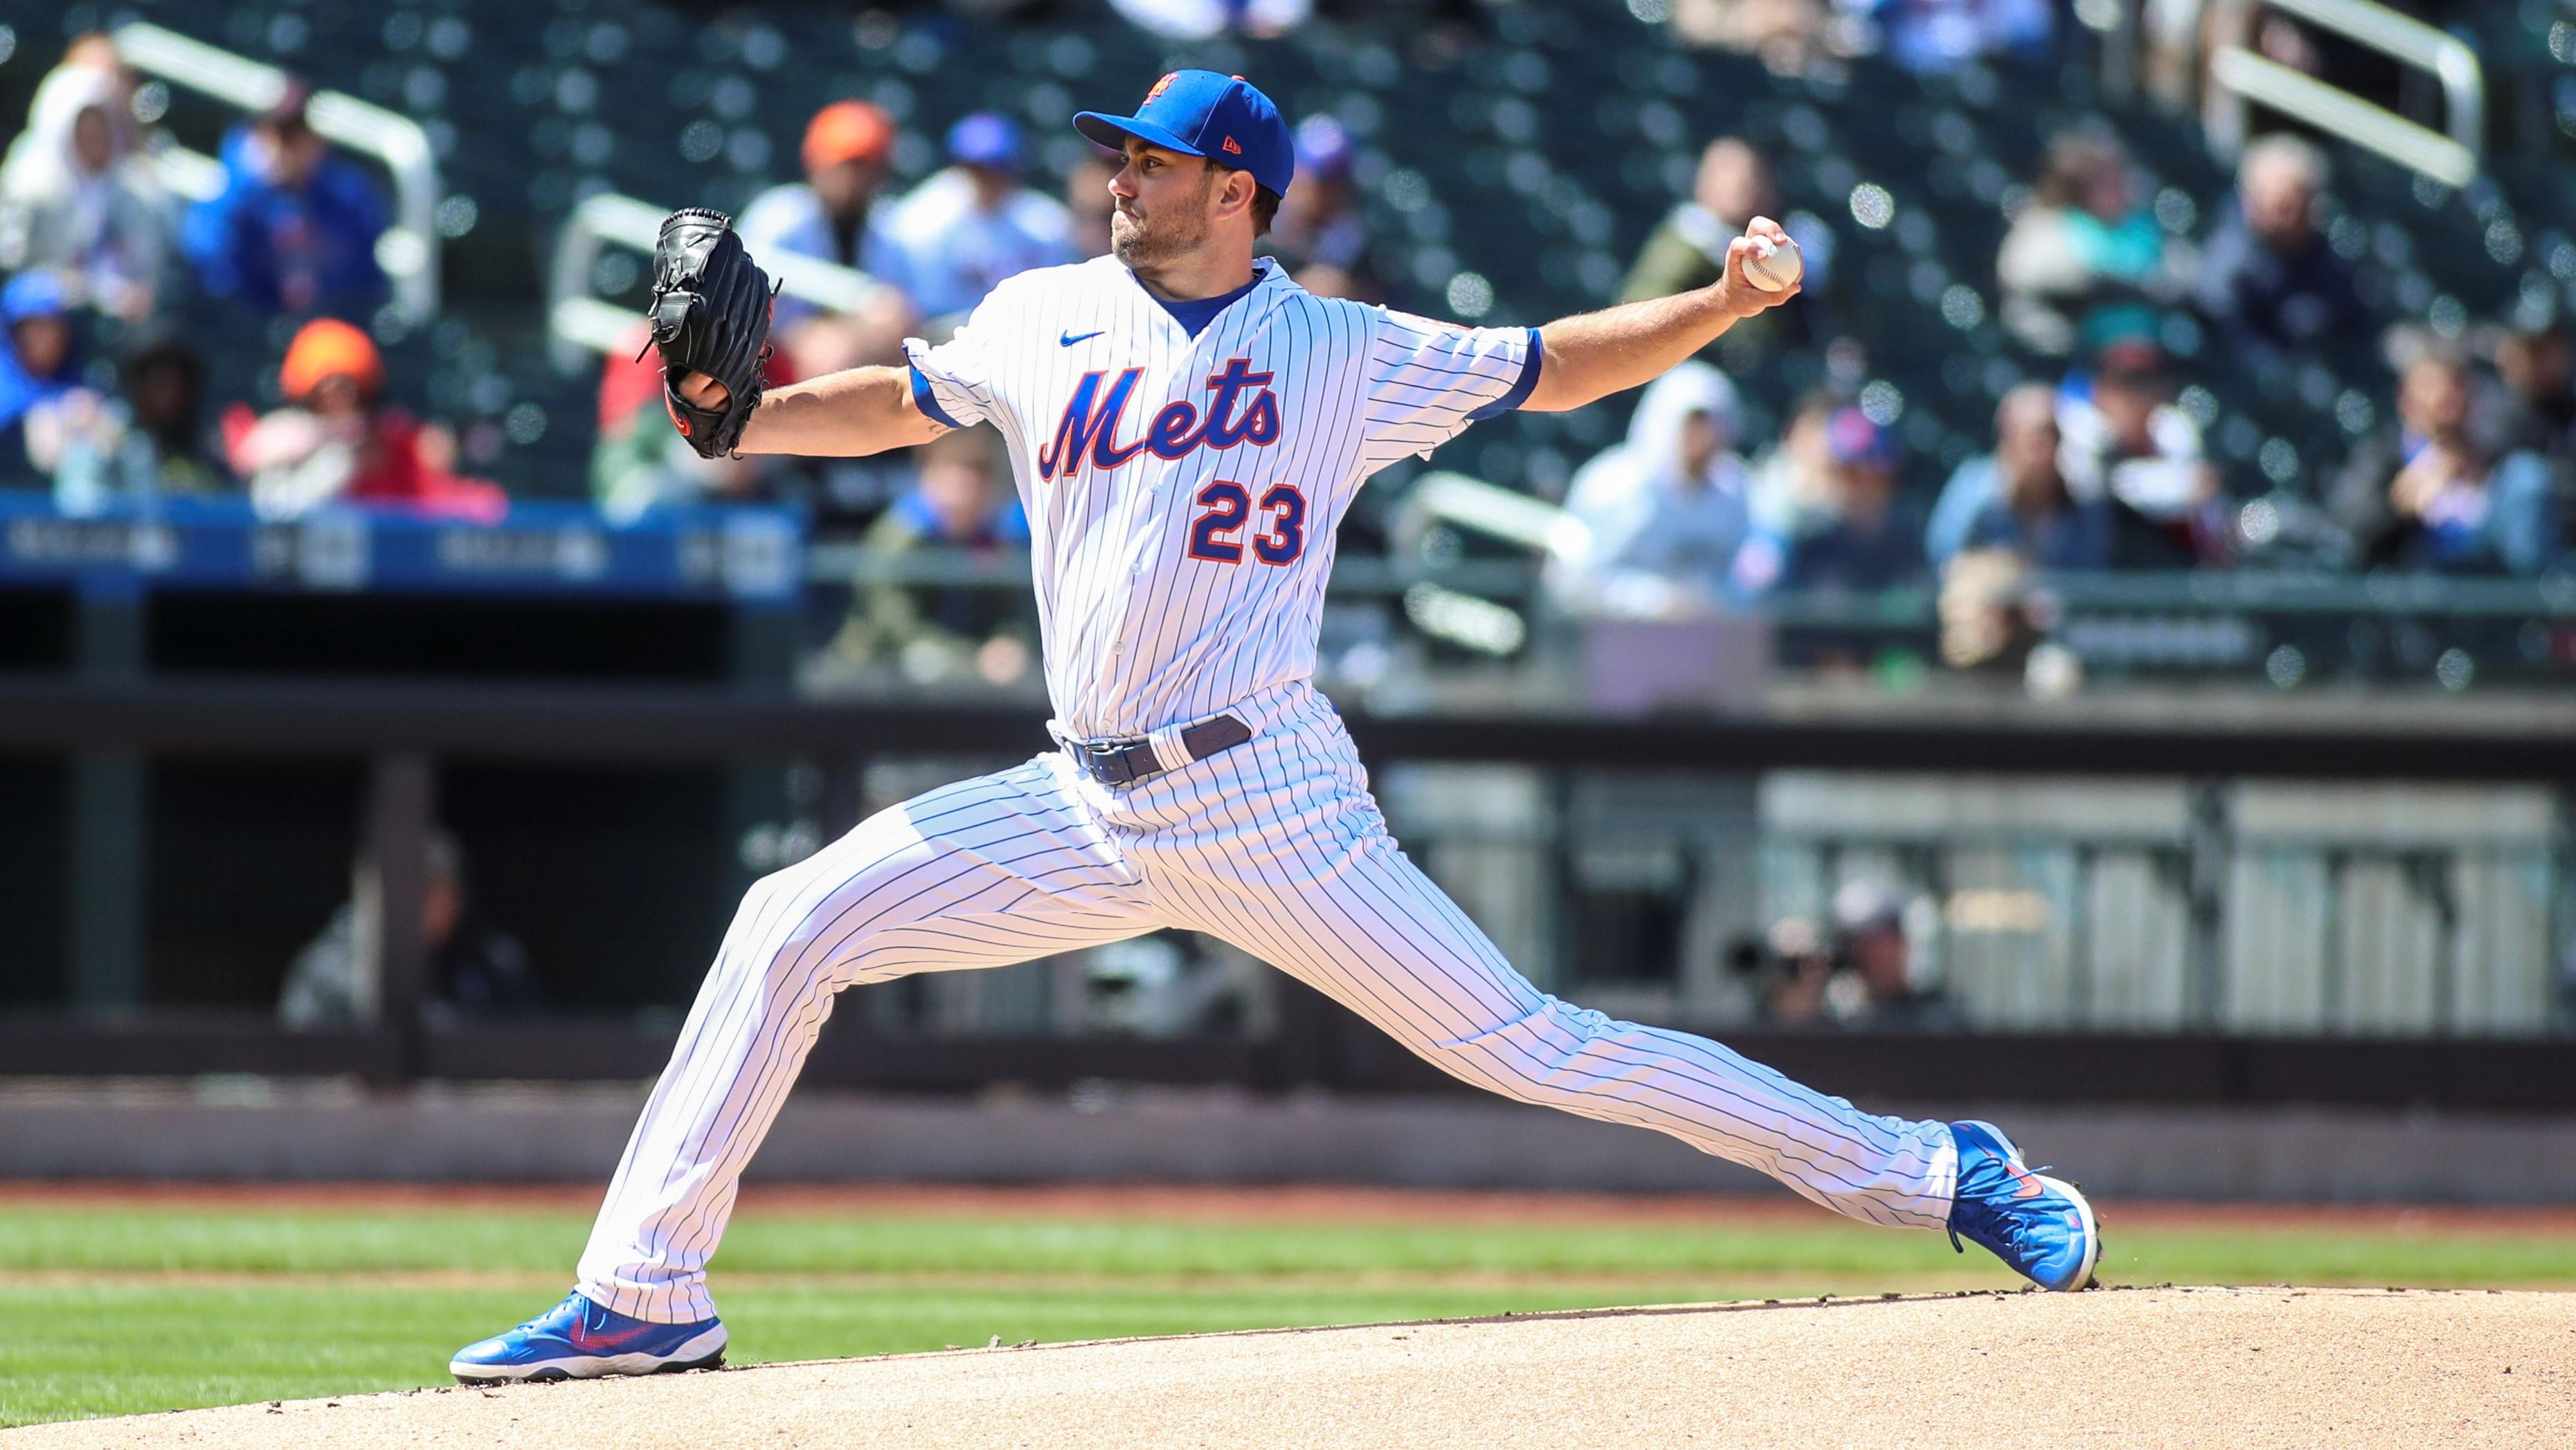 New York Mets starting pitcher David Peterson (23) pitches in the first inning against the Arizona Diamondbacks at Citi Field. / Wendell Cruz-USA TODAY Sports